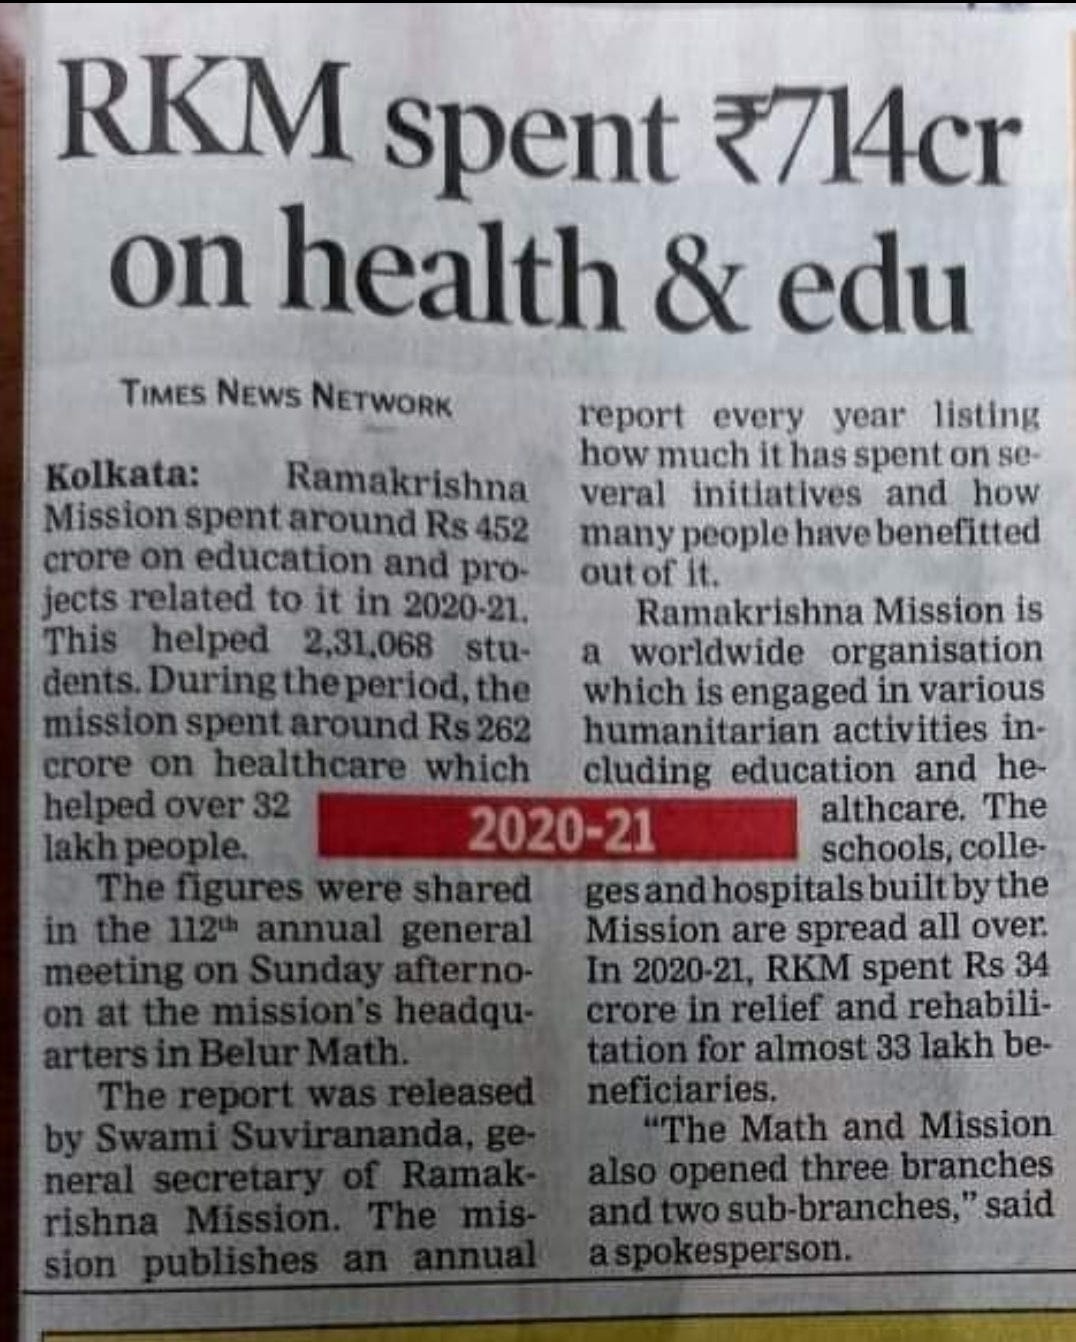 May be an image of text that says "RKM spent ₹714cr on health & edu TIMES NEWS NETWORK report every year listing how much it has spenton se- veral initiatives and how people have benefitted Kolkata: Ramakrishna Mission around Rs 452 on education and pro- jects related in 2020-21. This helped 2,31,068 stu- people. general Ramakrishna Mission is worldwide organisation which is engaged in various mission humanitariar activities in- crore on healthcare which cluding education and he- 2020-21 althcare. The schools, colle- the Mission are spread all over. RKM spent Rs 34 relief and rehabili- almost 33 lakh be- neficiaries. The Math and Mission three branches said"